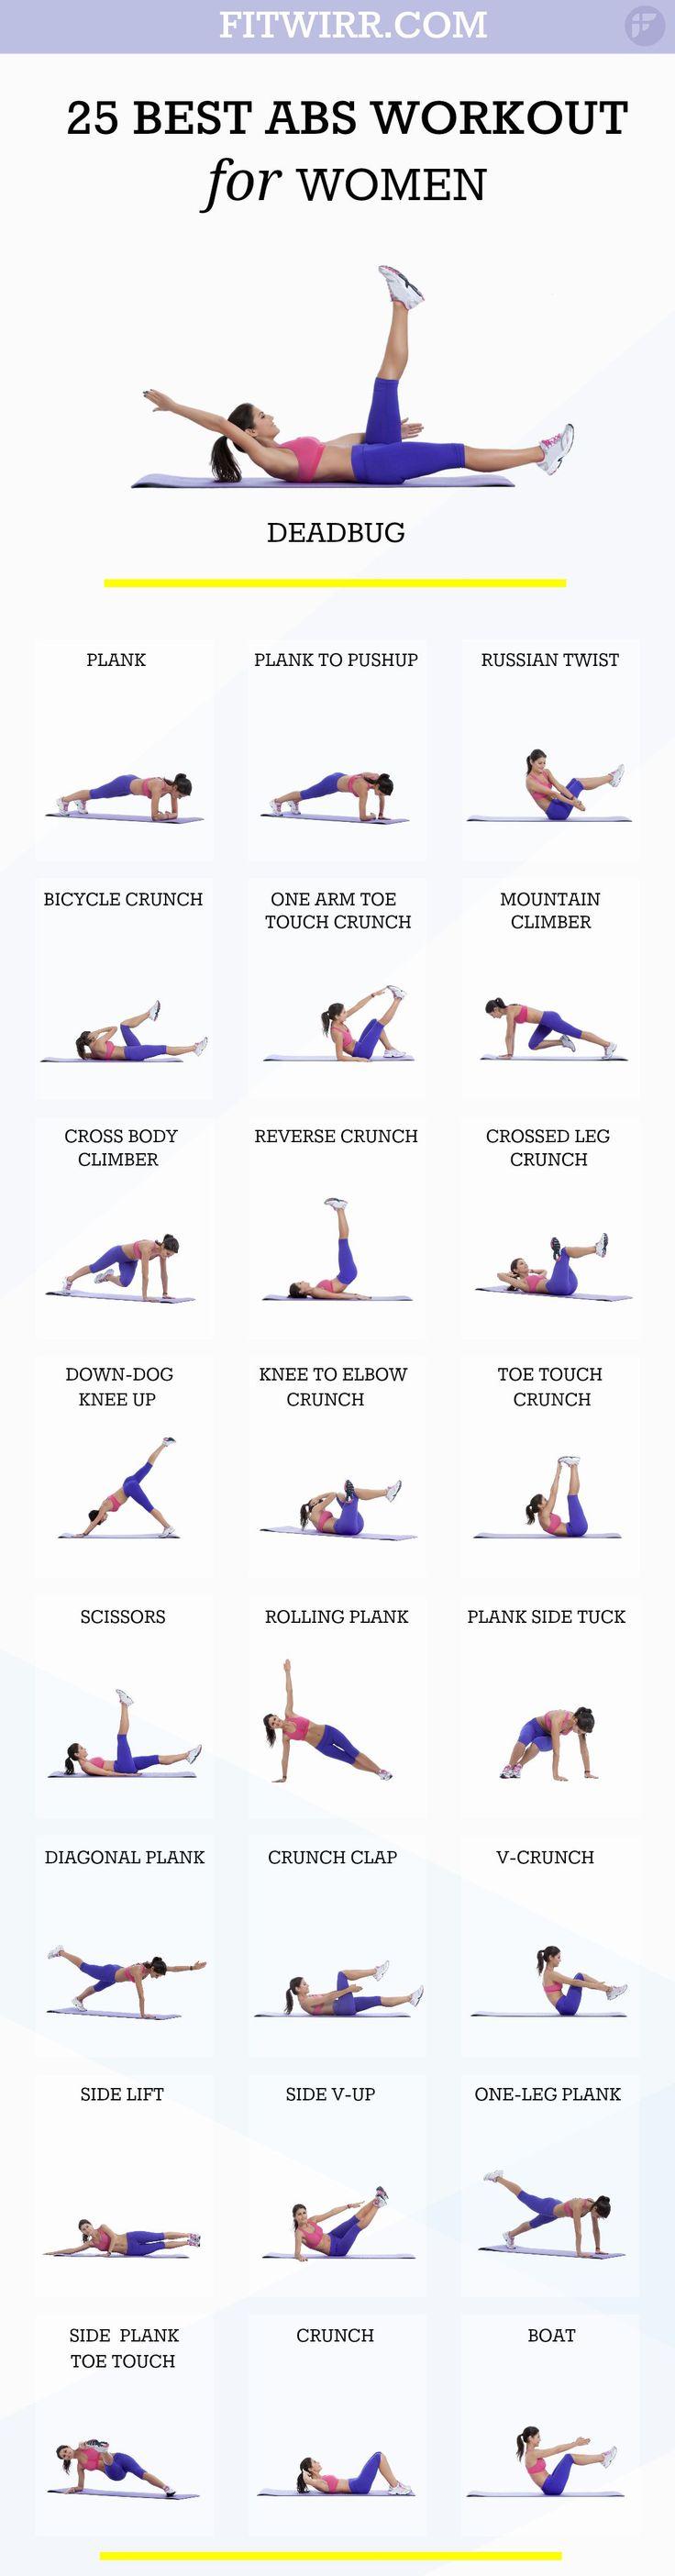 Wedding - Ab Workouts: 25 Best Ab Exercises For Women [Image List]